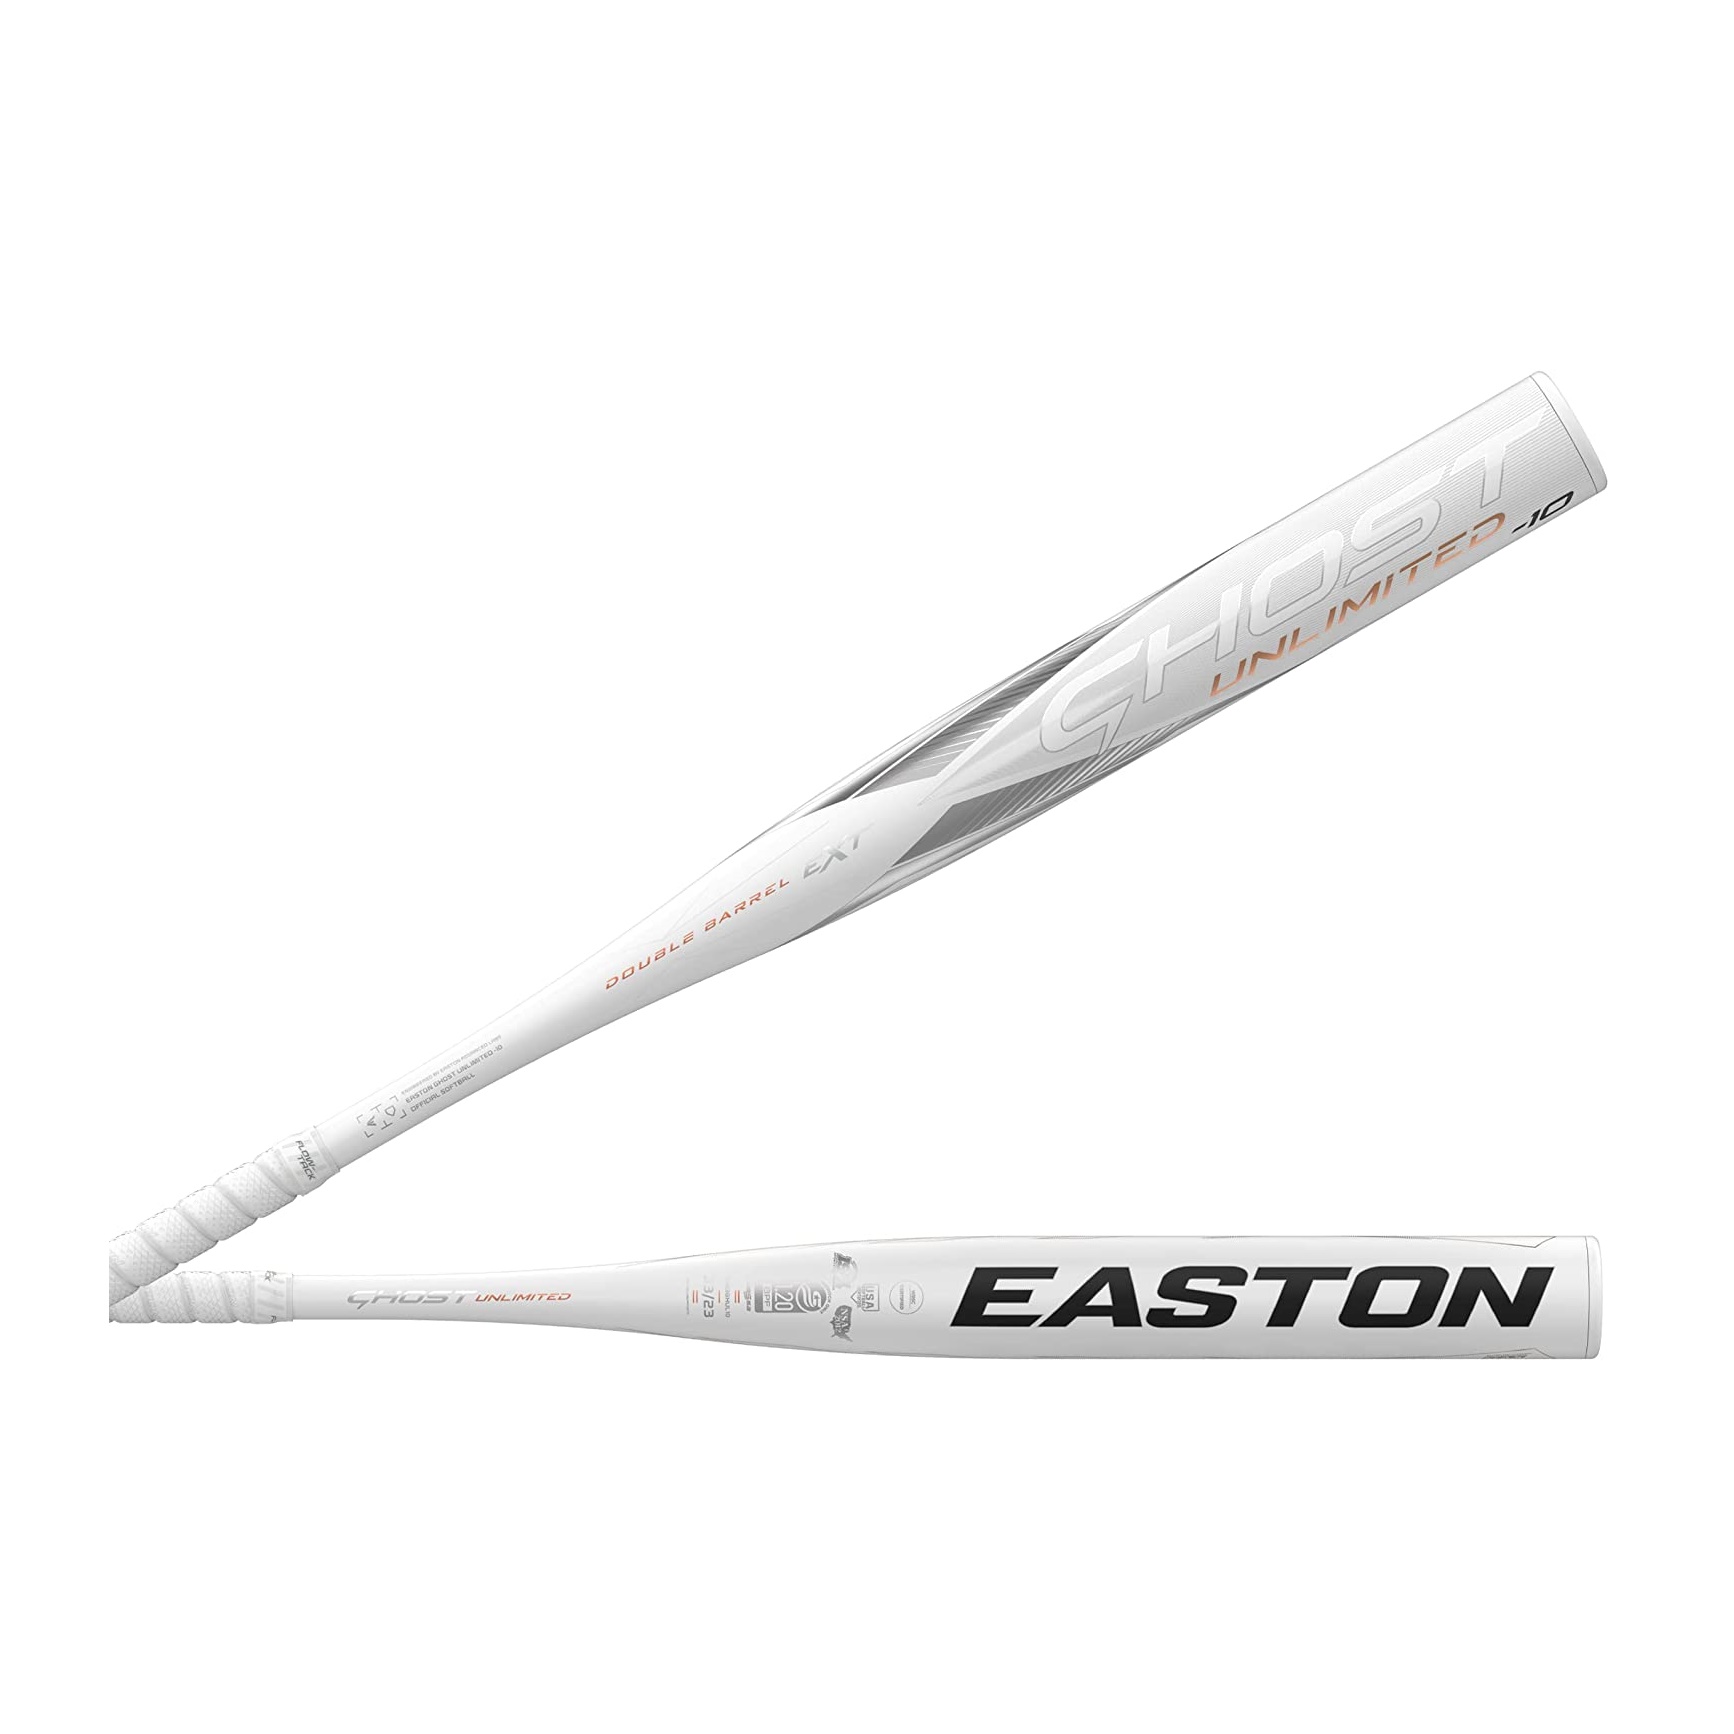 easton-ghost-unlimited-fp23ghul-10-fastpitch-softball-bat-31-inch-21-oz FP23GHUL10-3121 Easton 628412397510 Introducing the Easton Ghost Unlimited Fastpitch Softball Bat a true game-changer